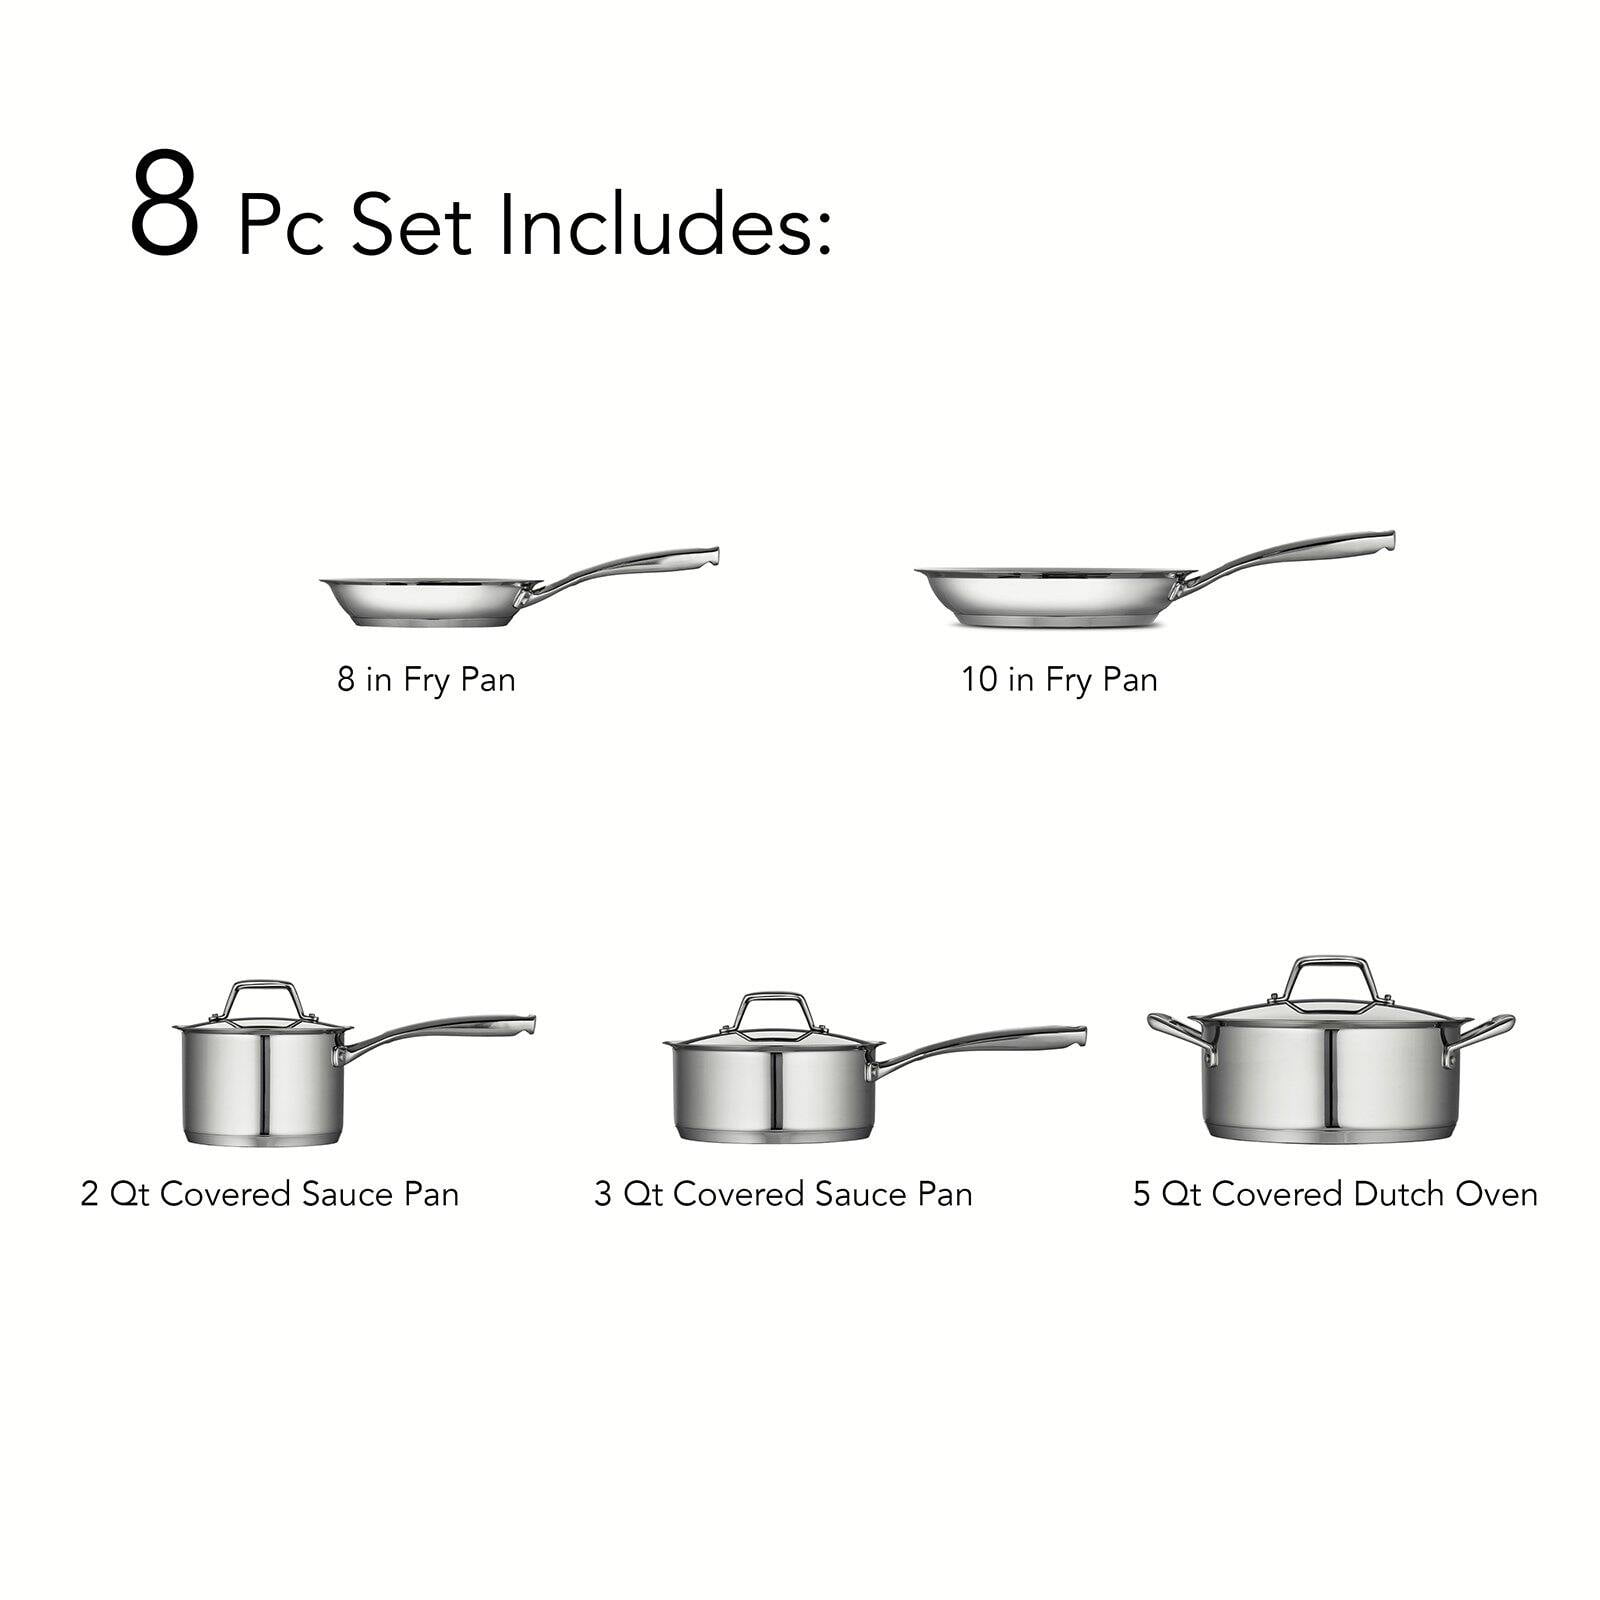 Tramontina Gourmet Prima Tri-Ply Stainless Steel 8-pc. Cookware Set